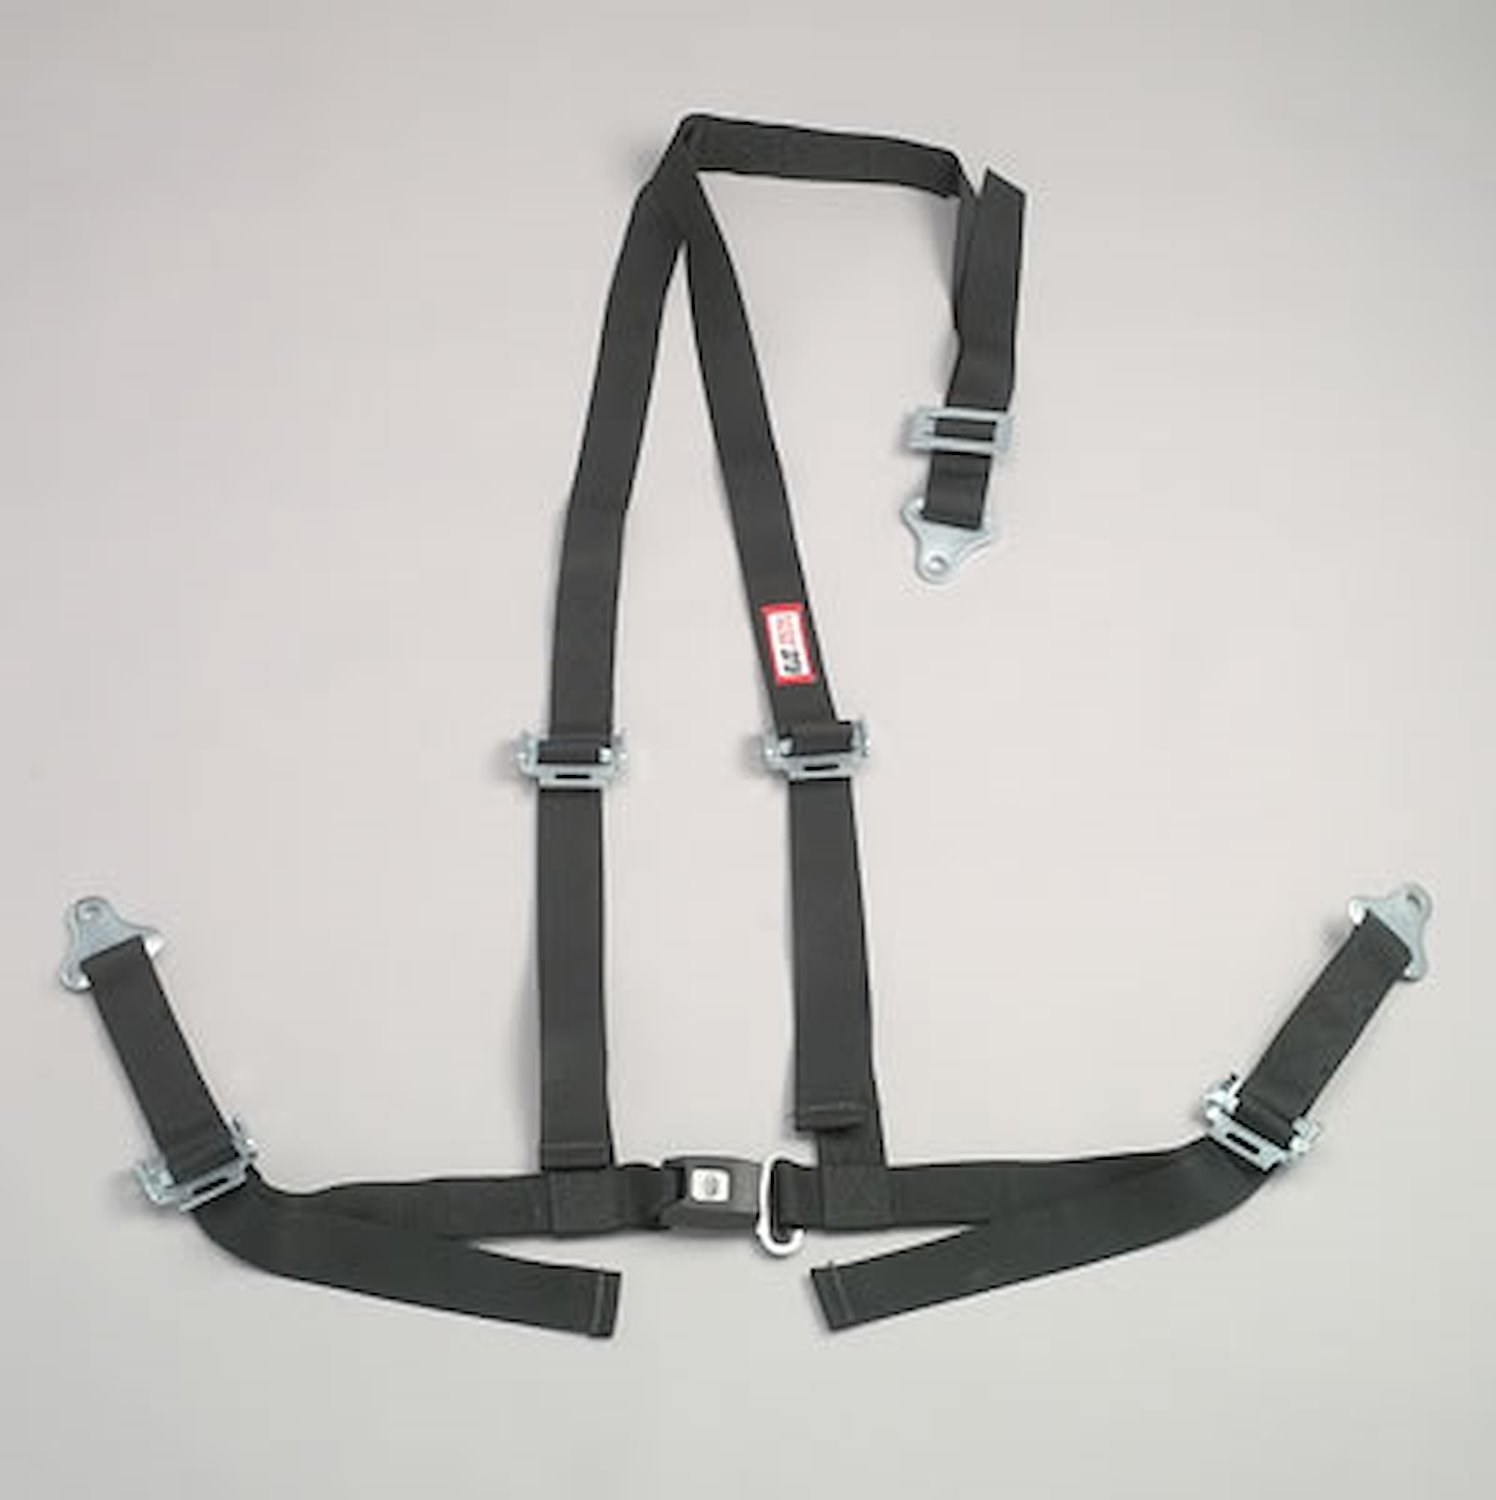 NON-SFI B&T HARNESS 2 PULL UP Lap Belt SNAP 2 S. H. Individual ROLL BAR Mount WRAP/BOLT GRAY